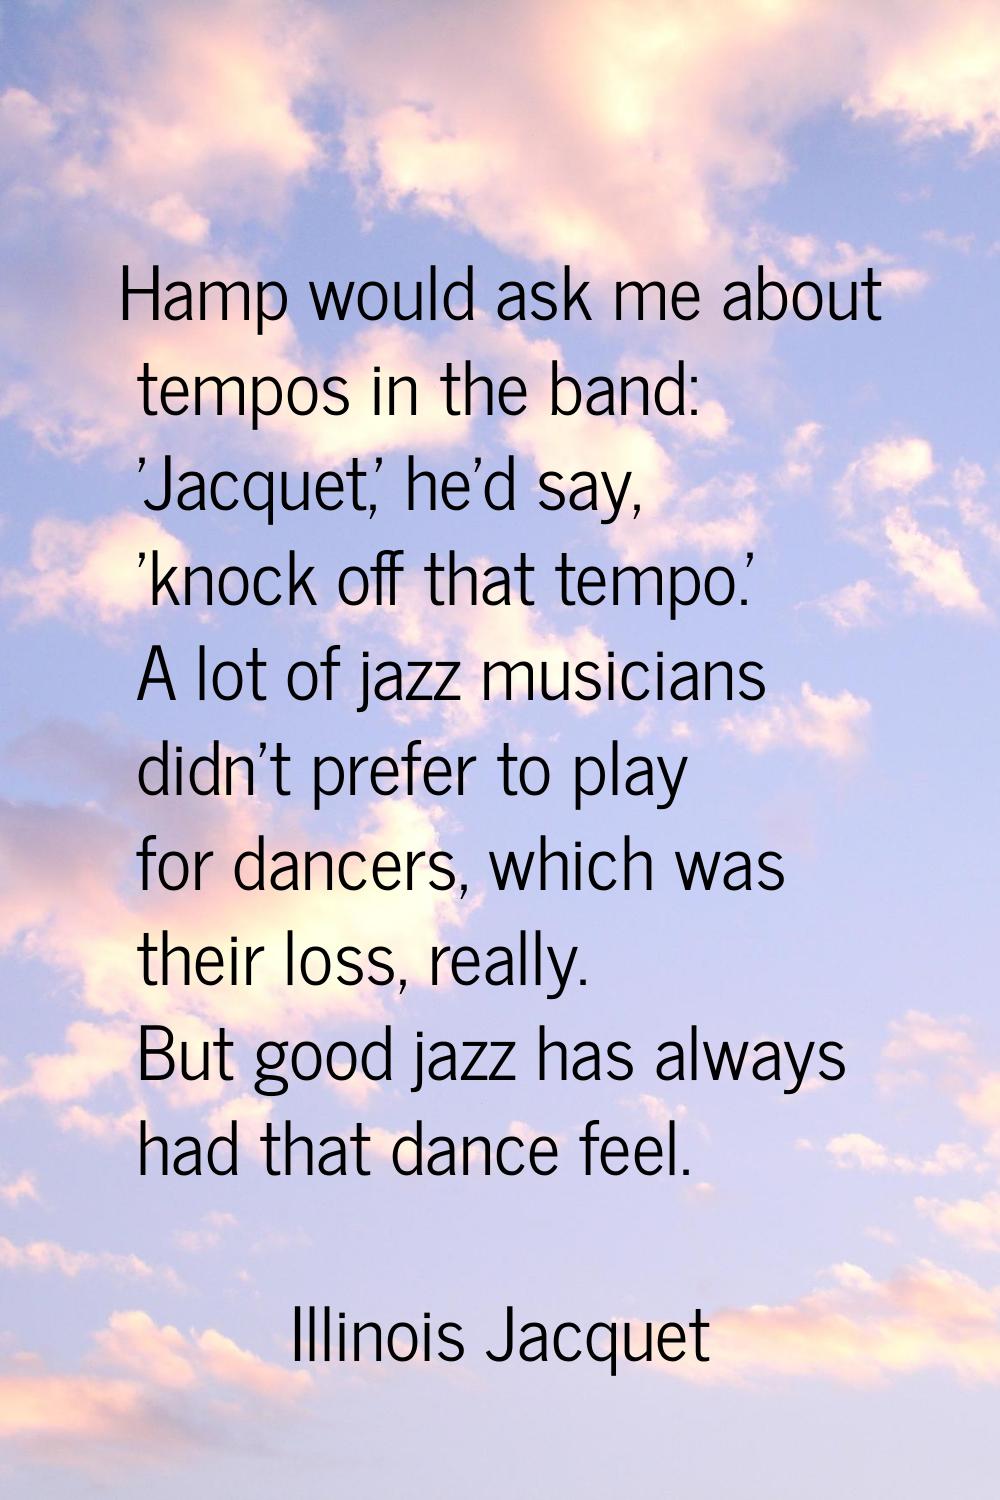 Hamp would ask me about tempos in the band: 'Jacquet,' he'd say, 'knock off that tempo.' A lot of j